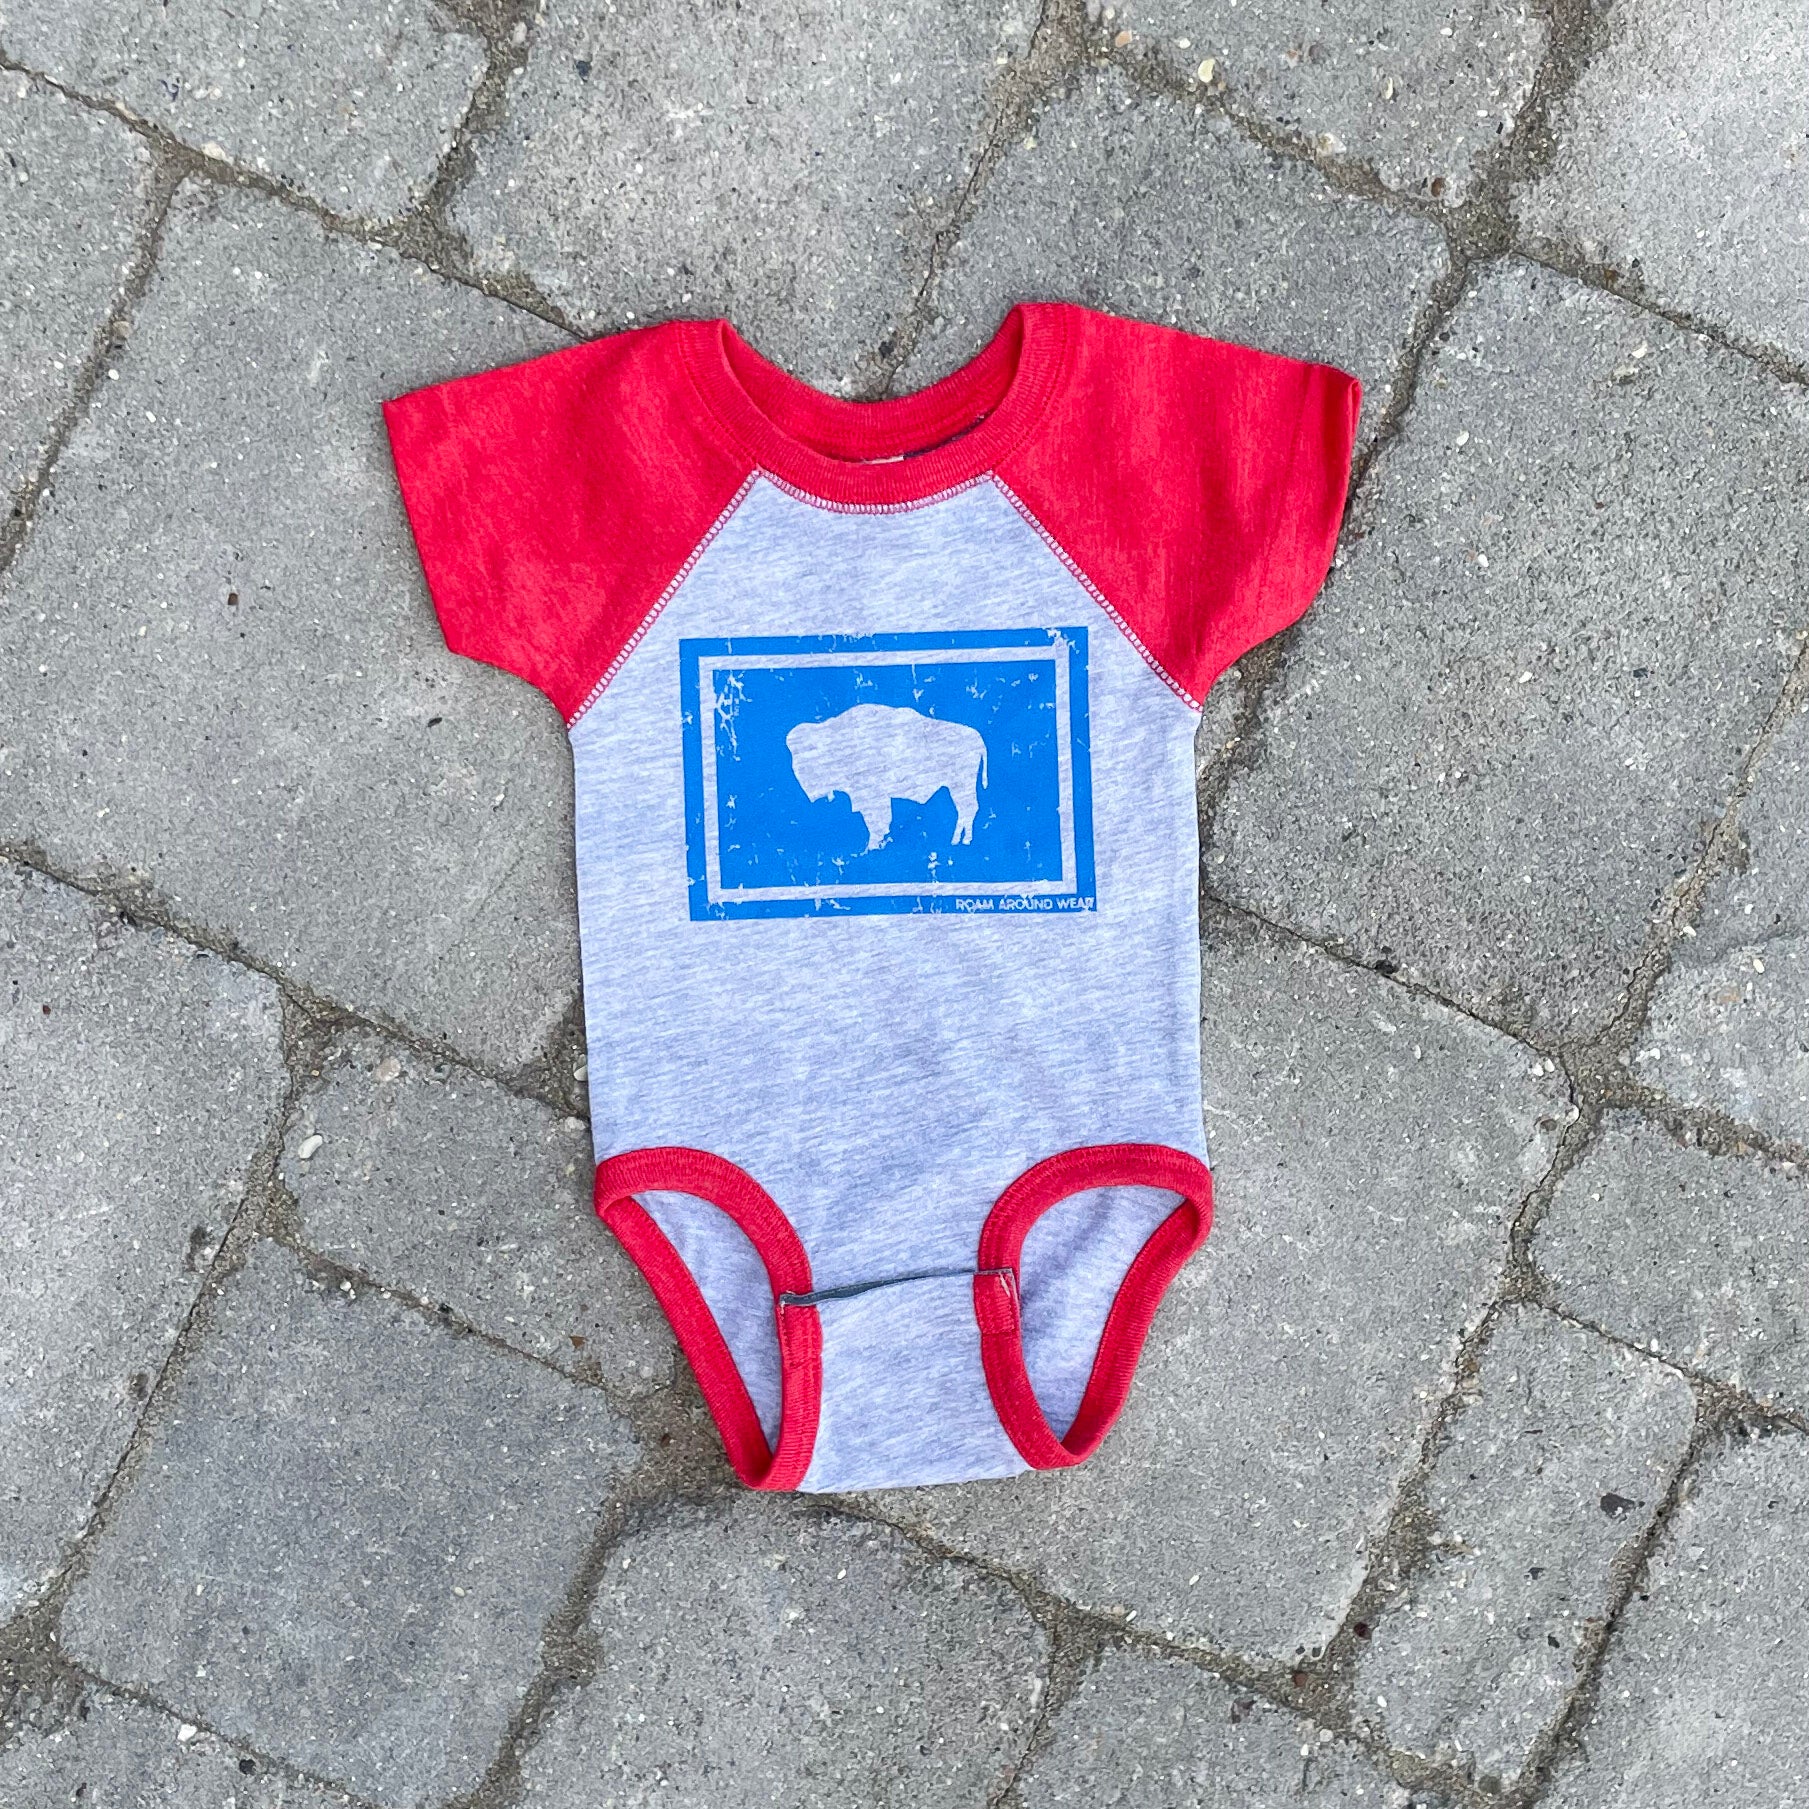 Wyoming flag infant red/gray/blue onesie. Roam Around Wear is a women owned Wyoming T-Shirt company based out of Gillette, Wyoming.